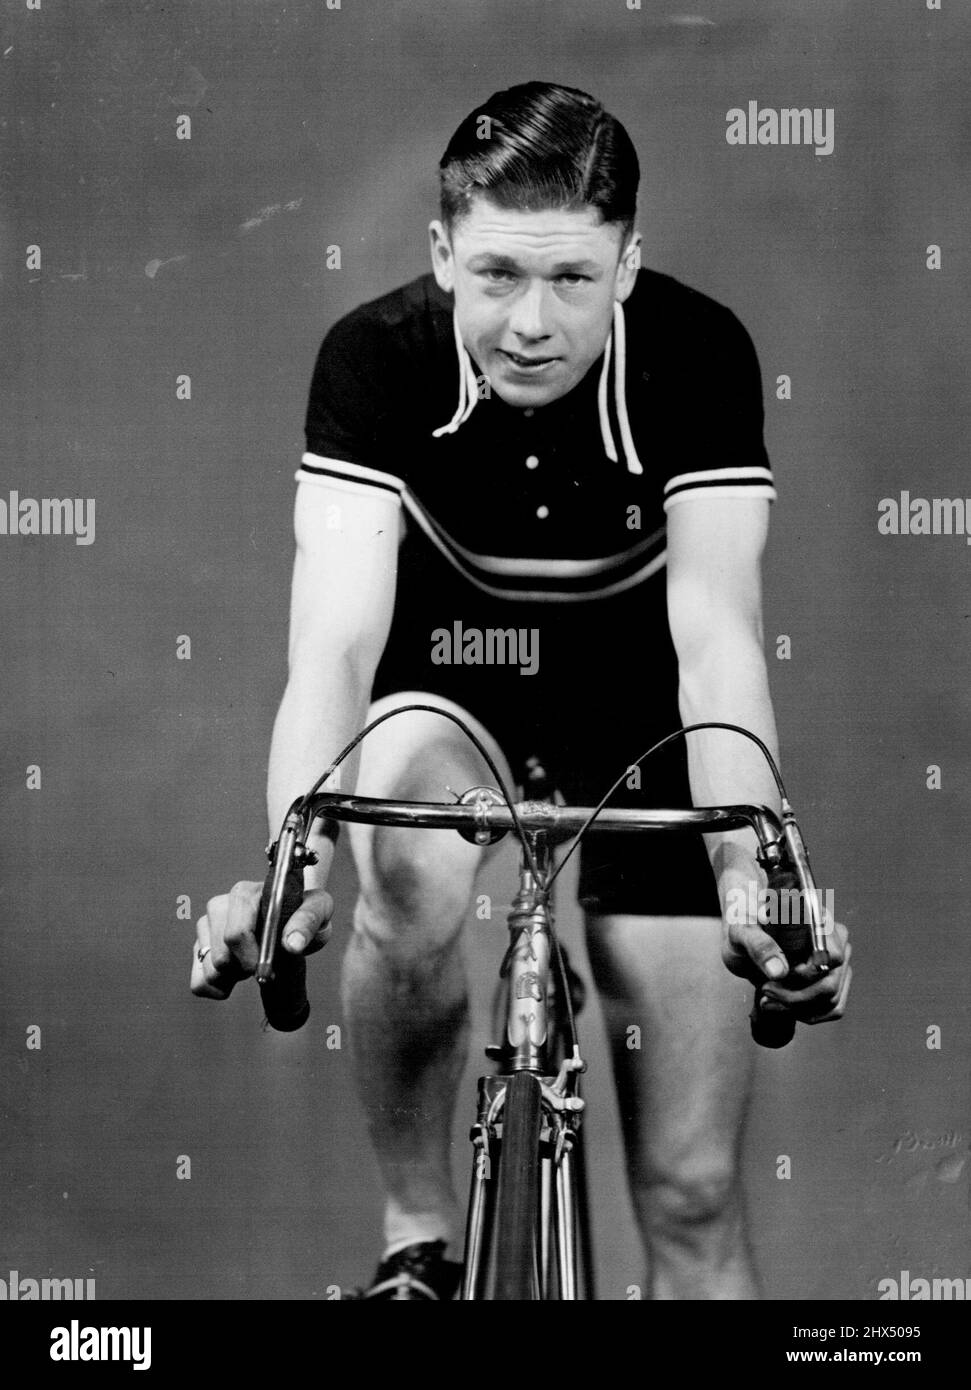 Alf. Strom, the strong Marrickville rider, who should do well in the State road championships. He will ride in the third heat tomorrow. August 01, 1938. Stock Photo